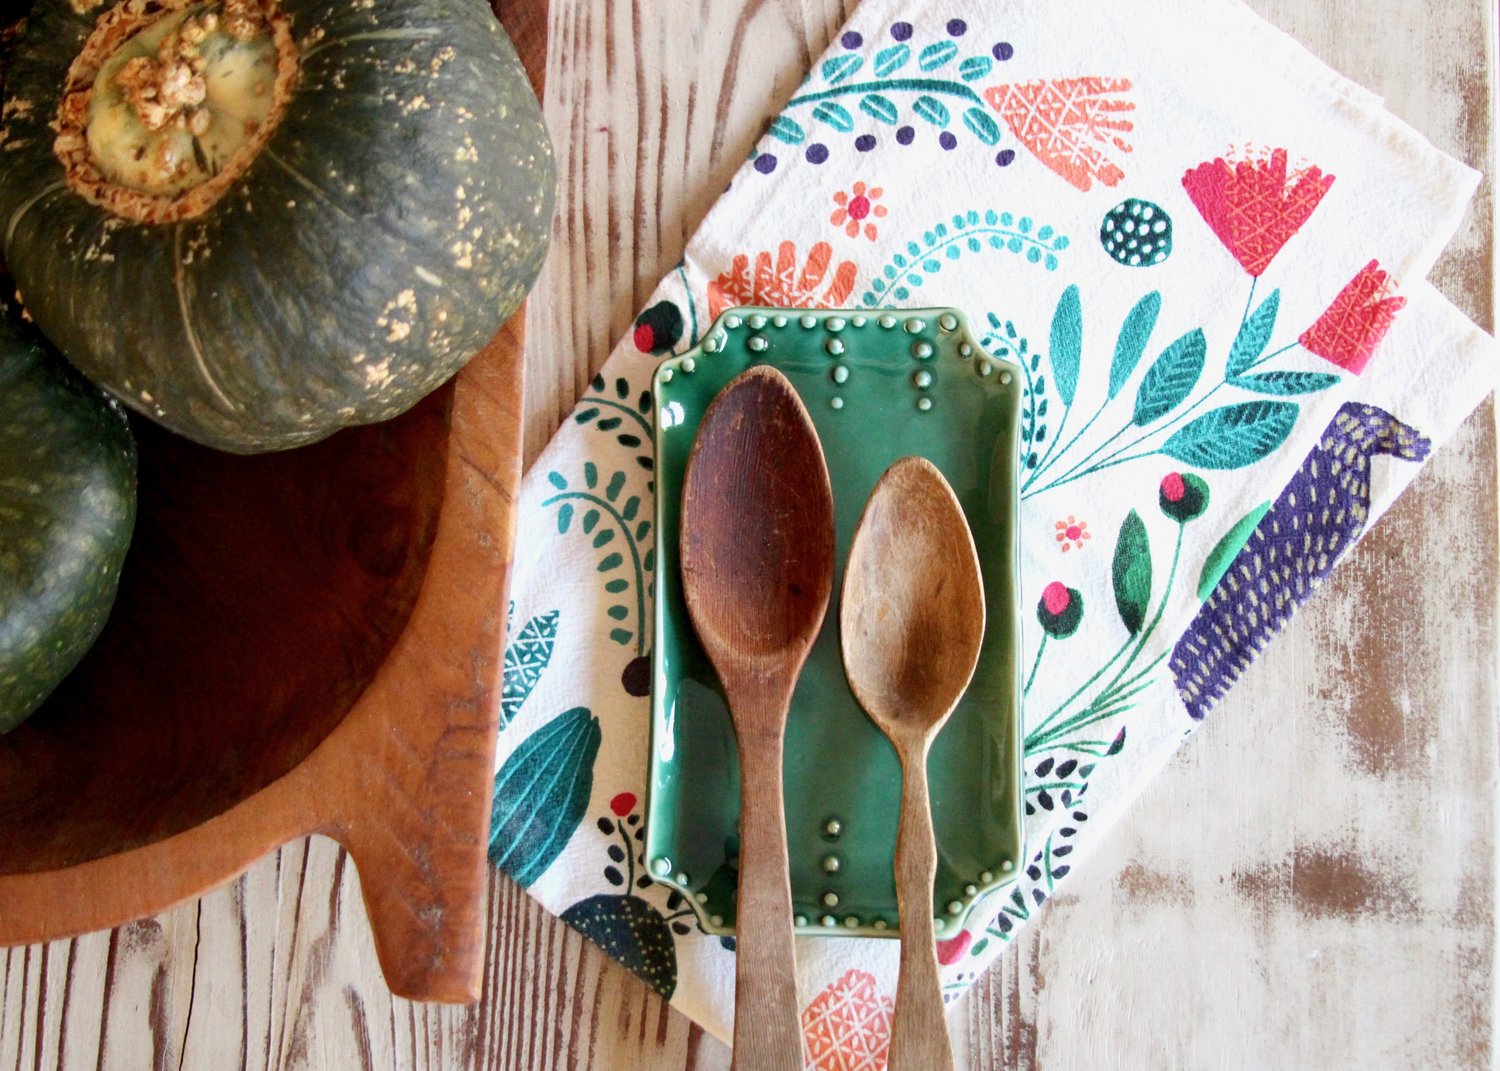 Large Spoon Rest - 16 Color Choices — Back Bay Pottery